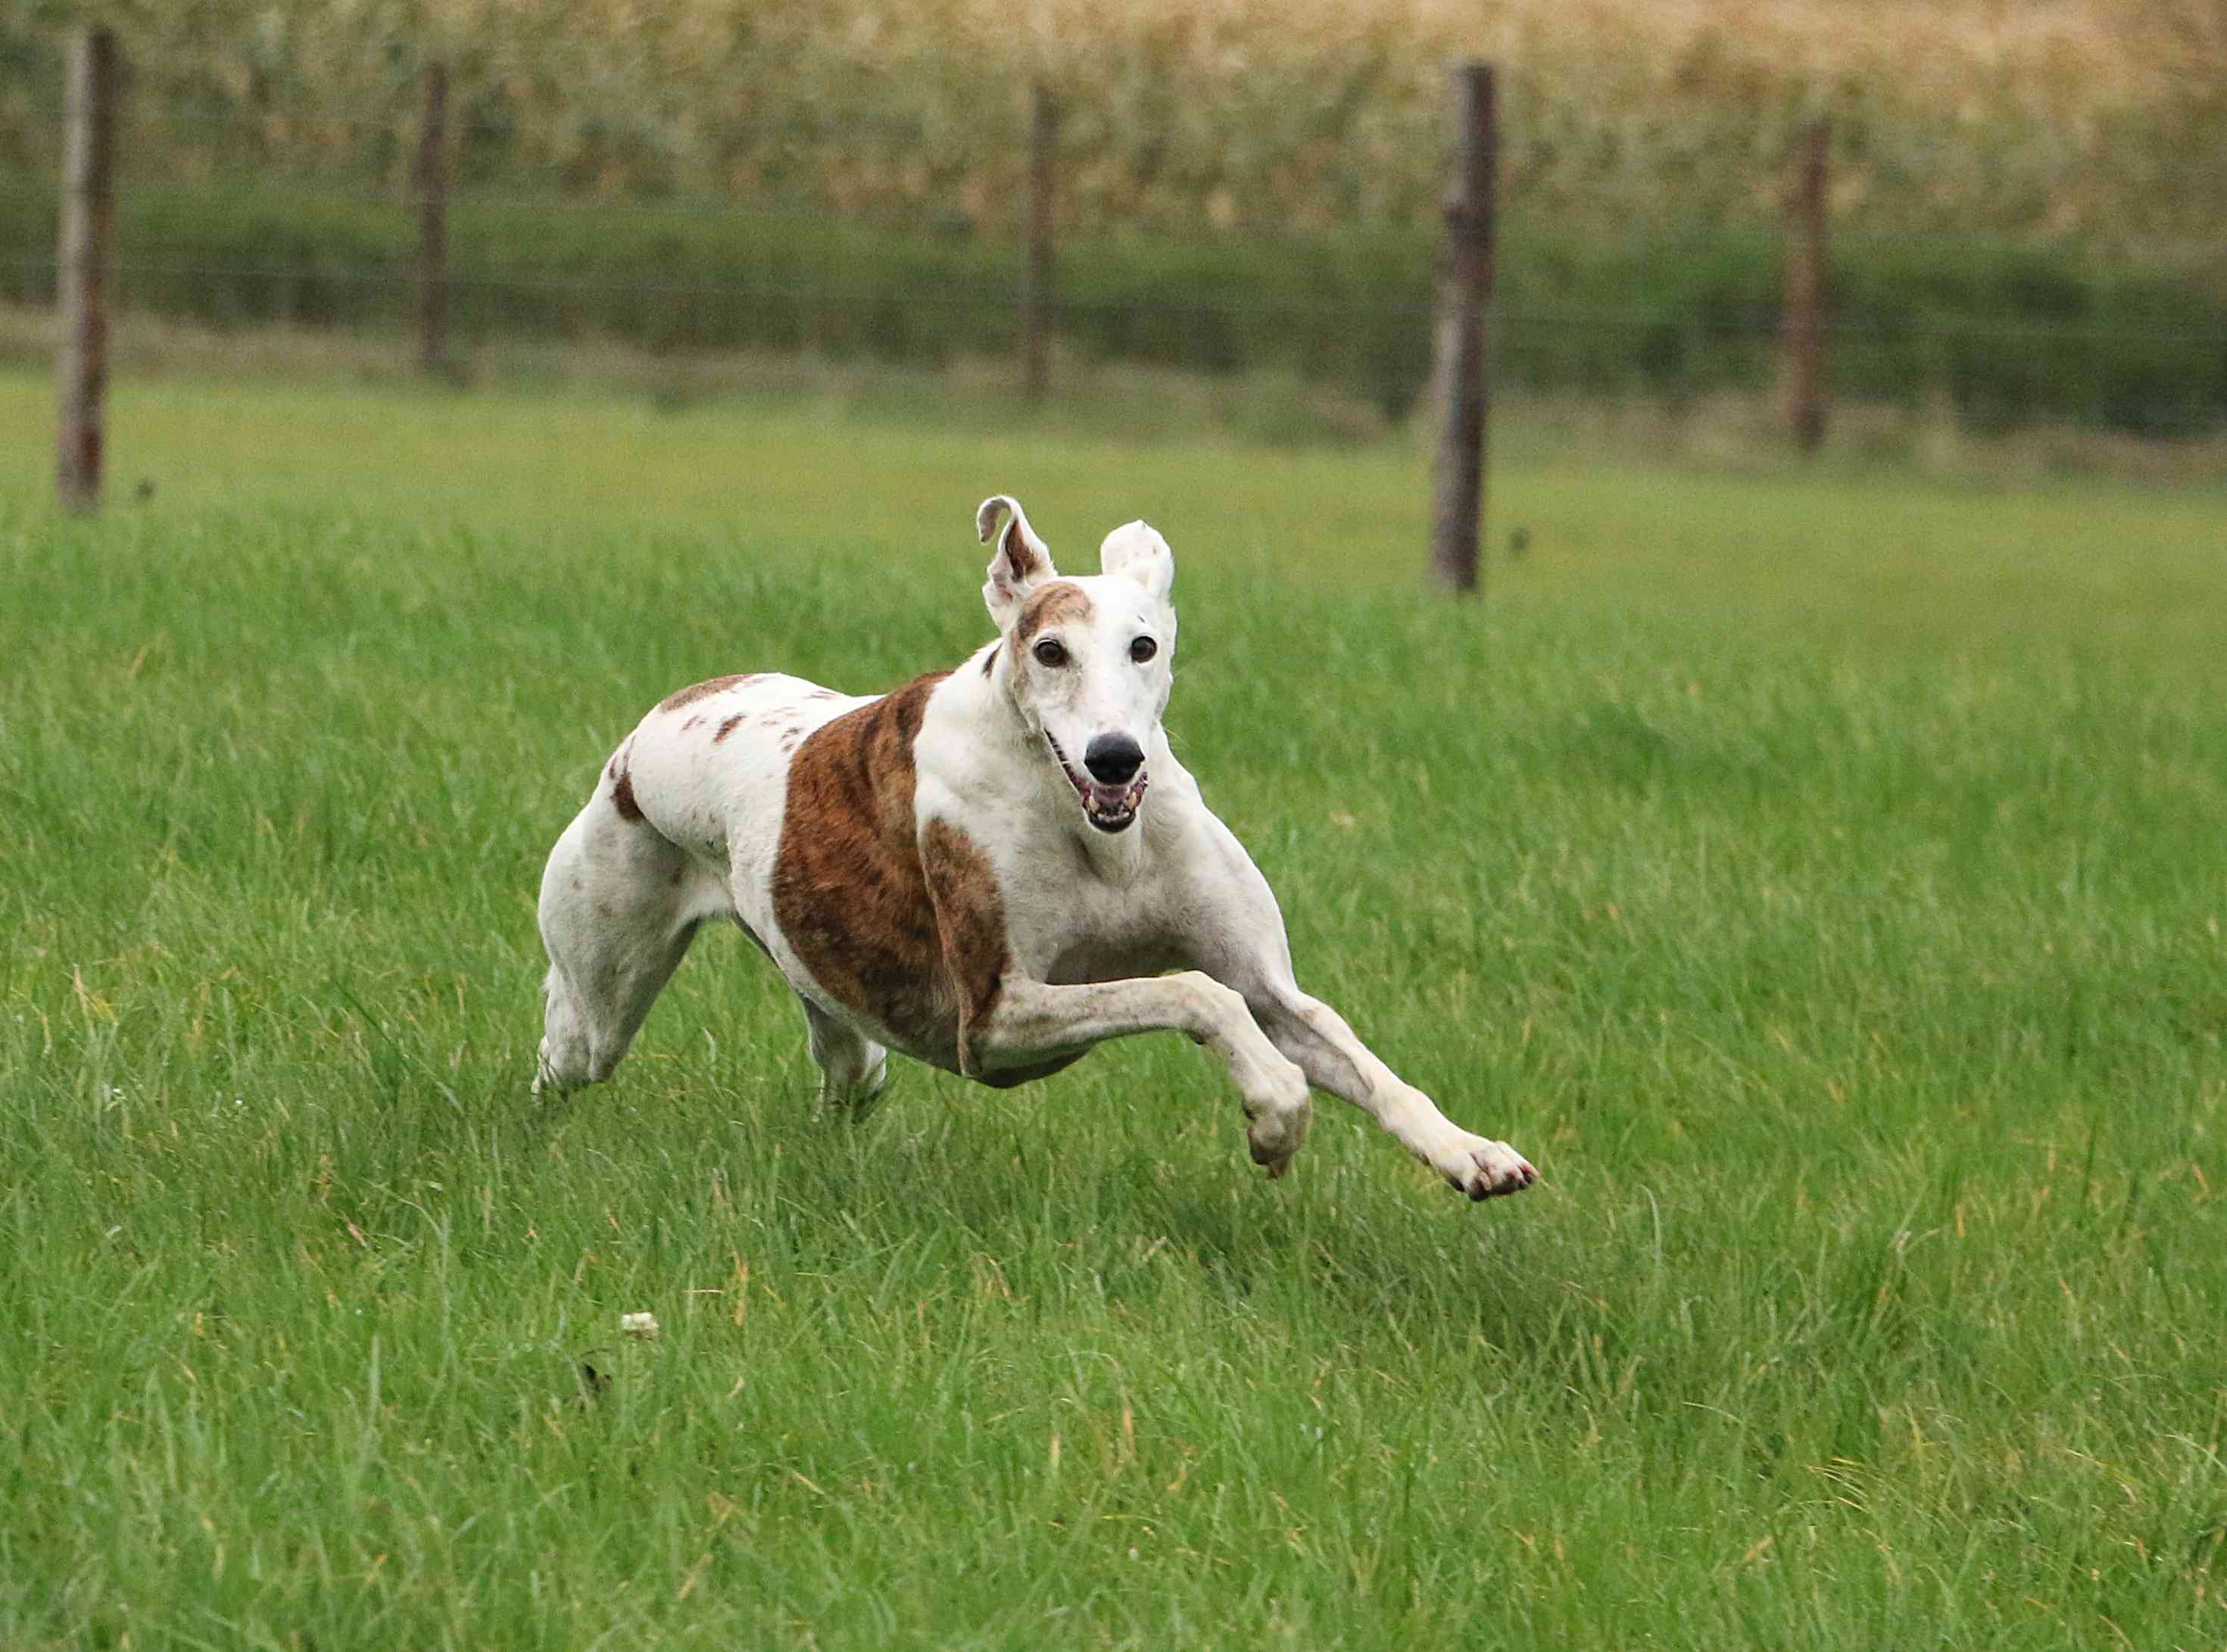 White and Brindle greyhound running in a grassy field